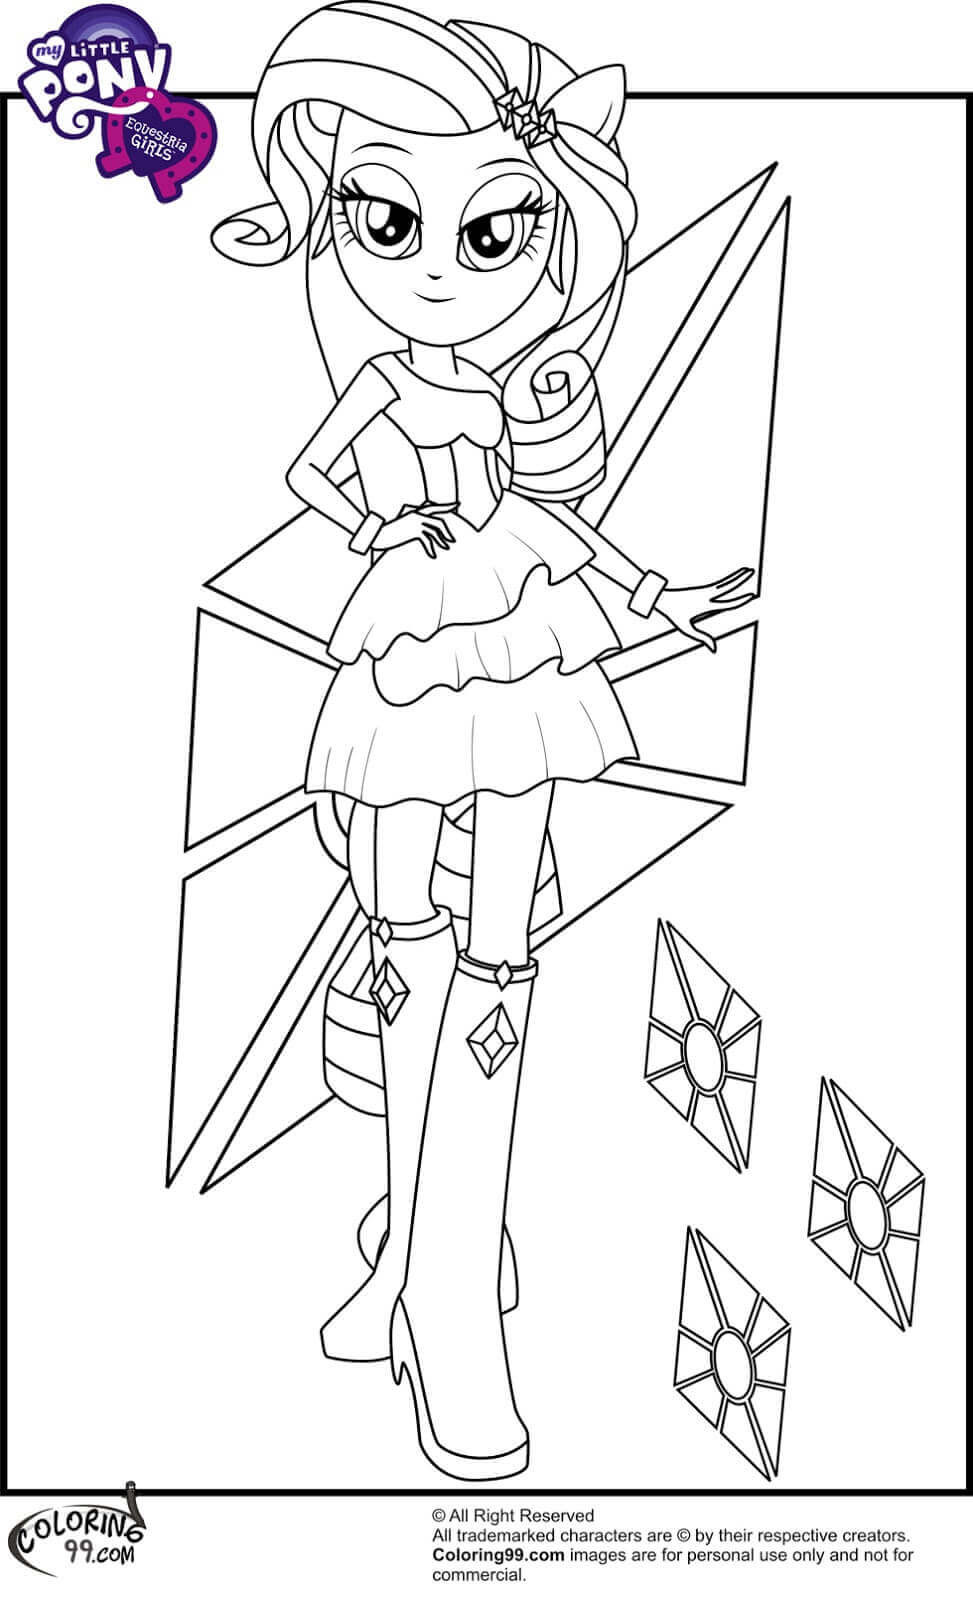 Free Equestria Girl Coloring Pages
 15 Printable My Little Pony Equestria Girls Coloring Pages